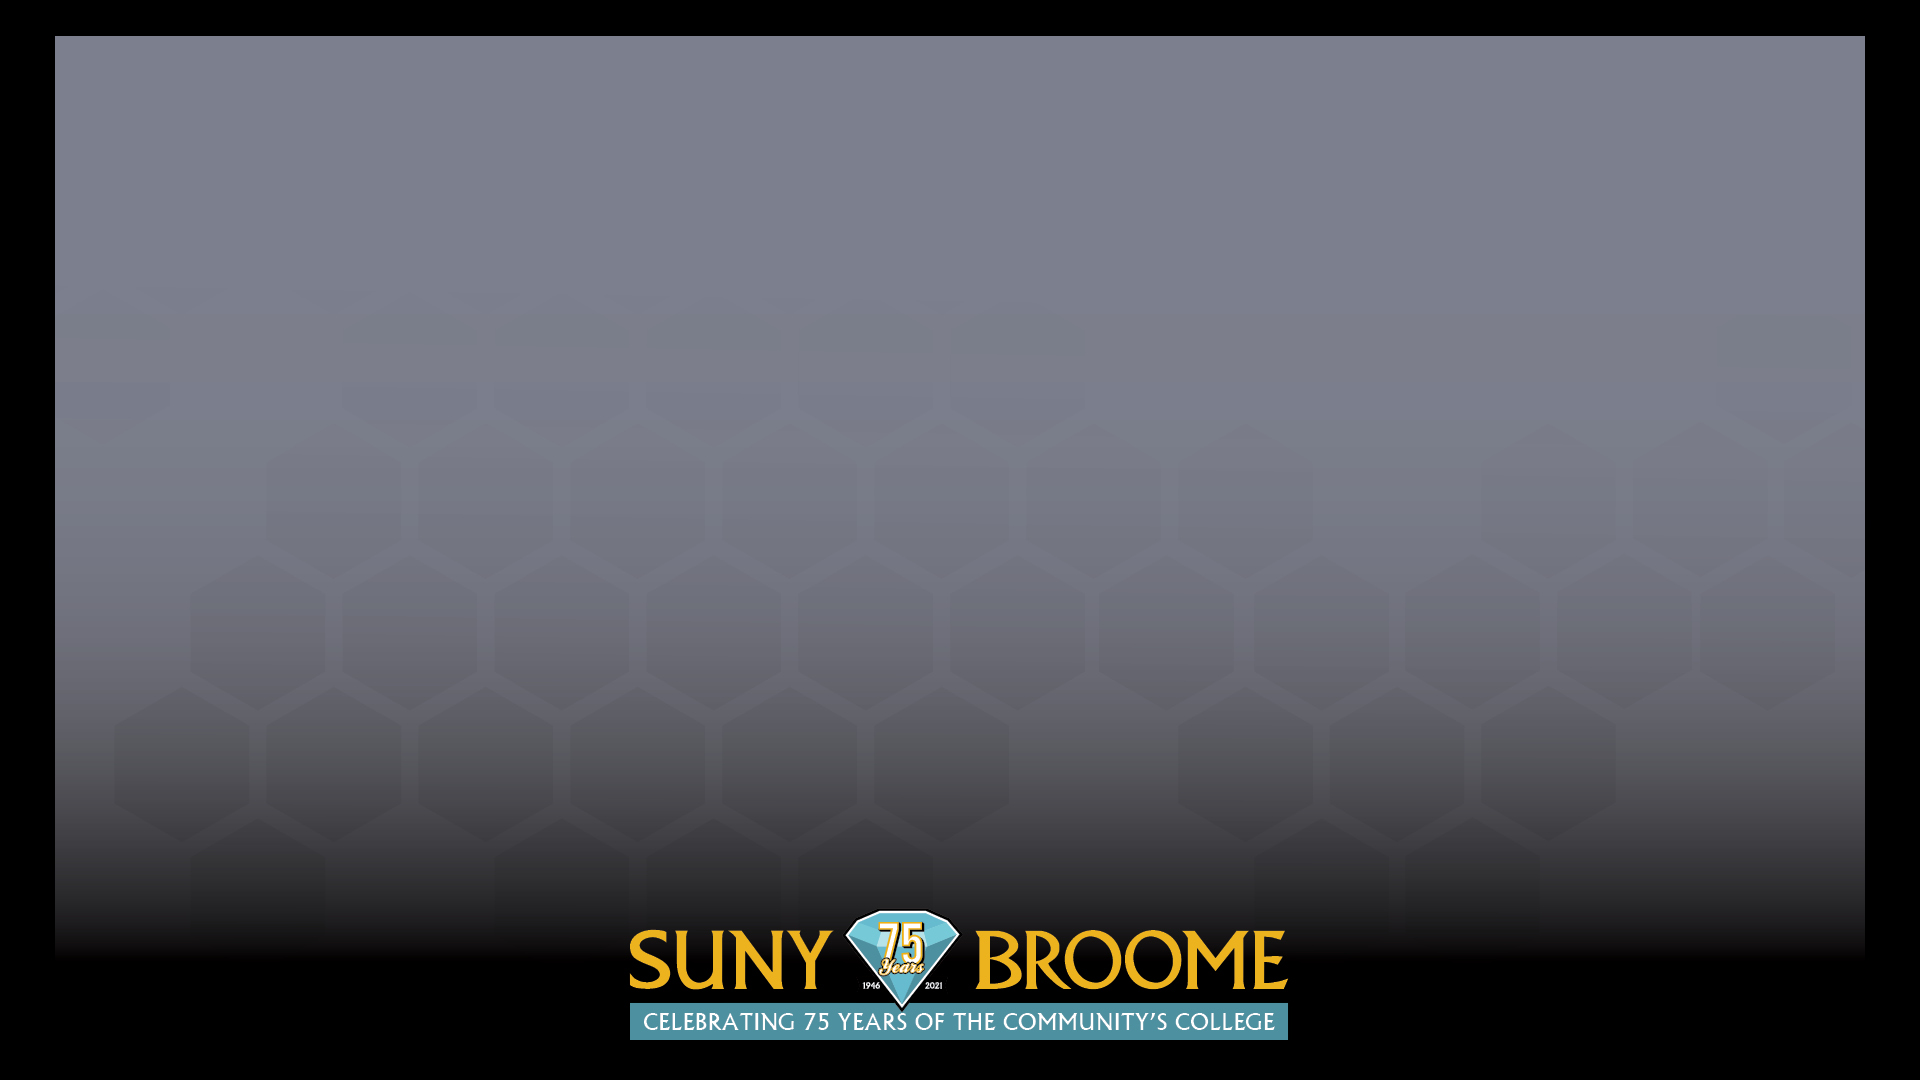 Powerpoint background with a dark grayish black background and the SUNY Broome 75th anniversary logo at the bottom